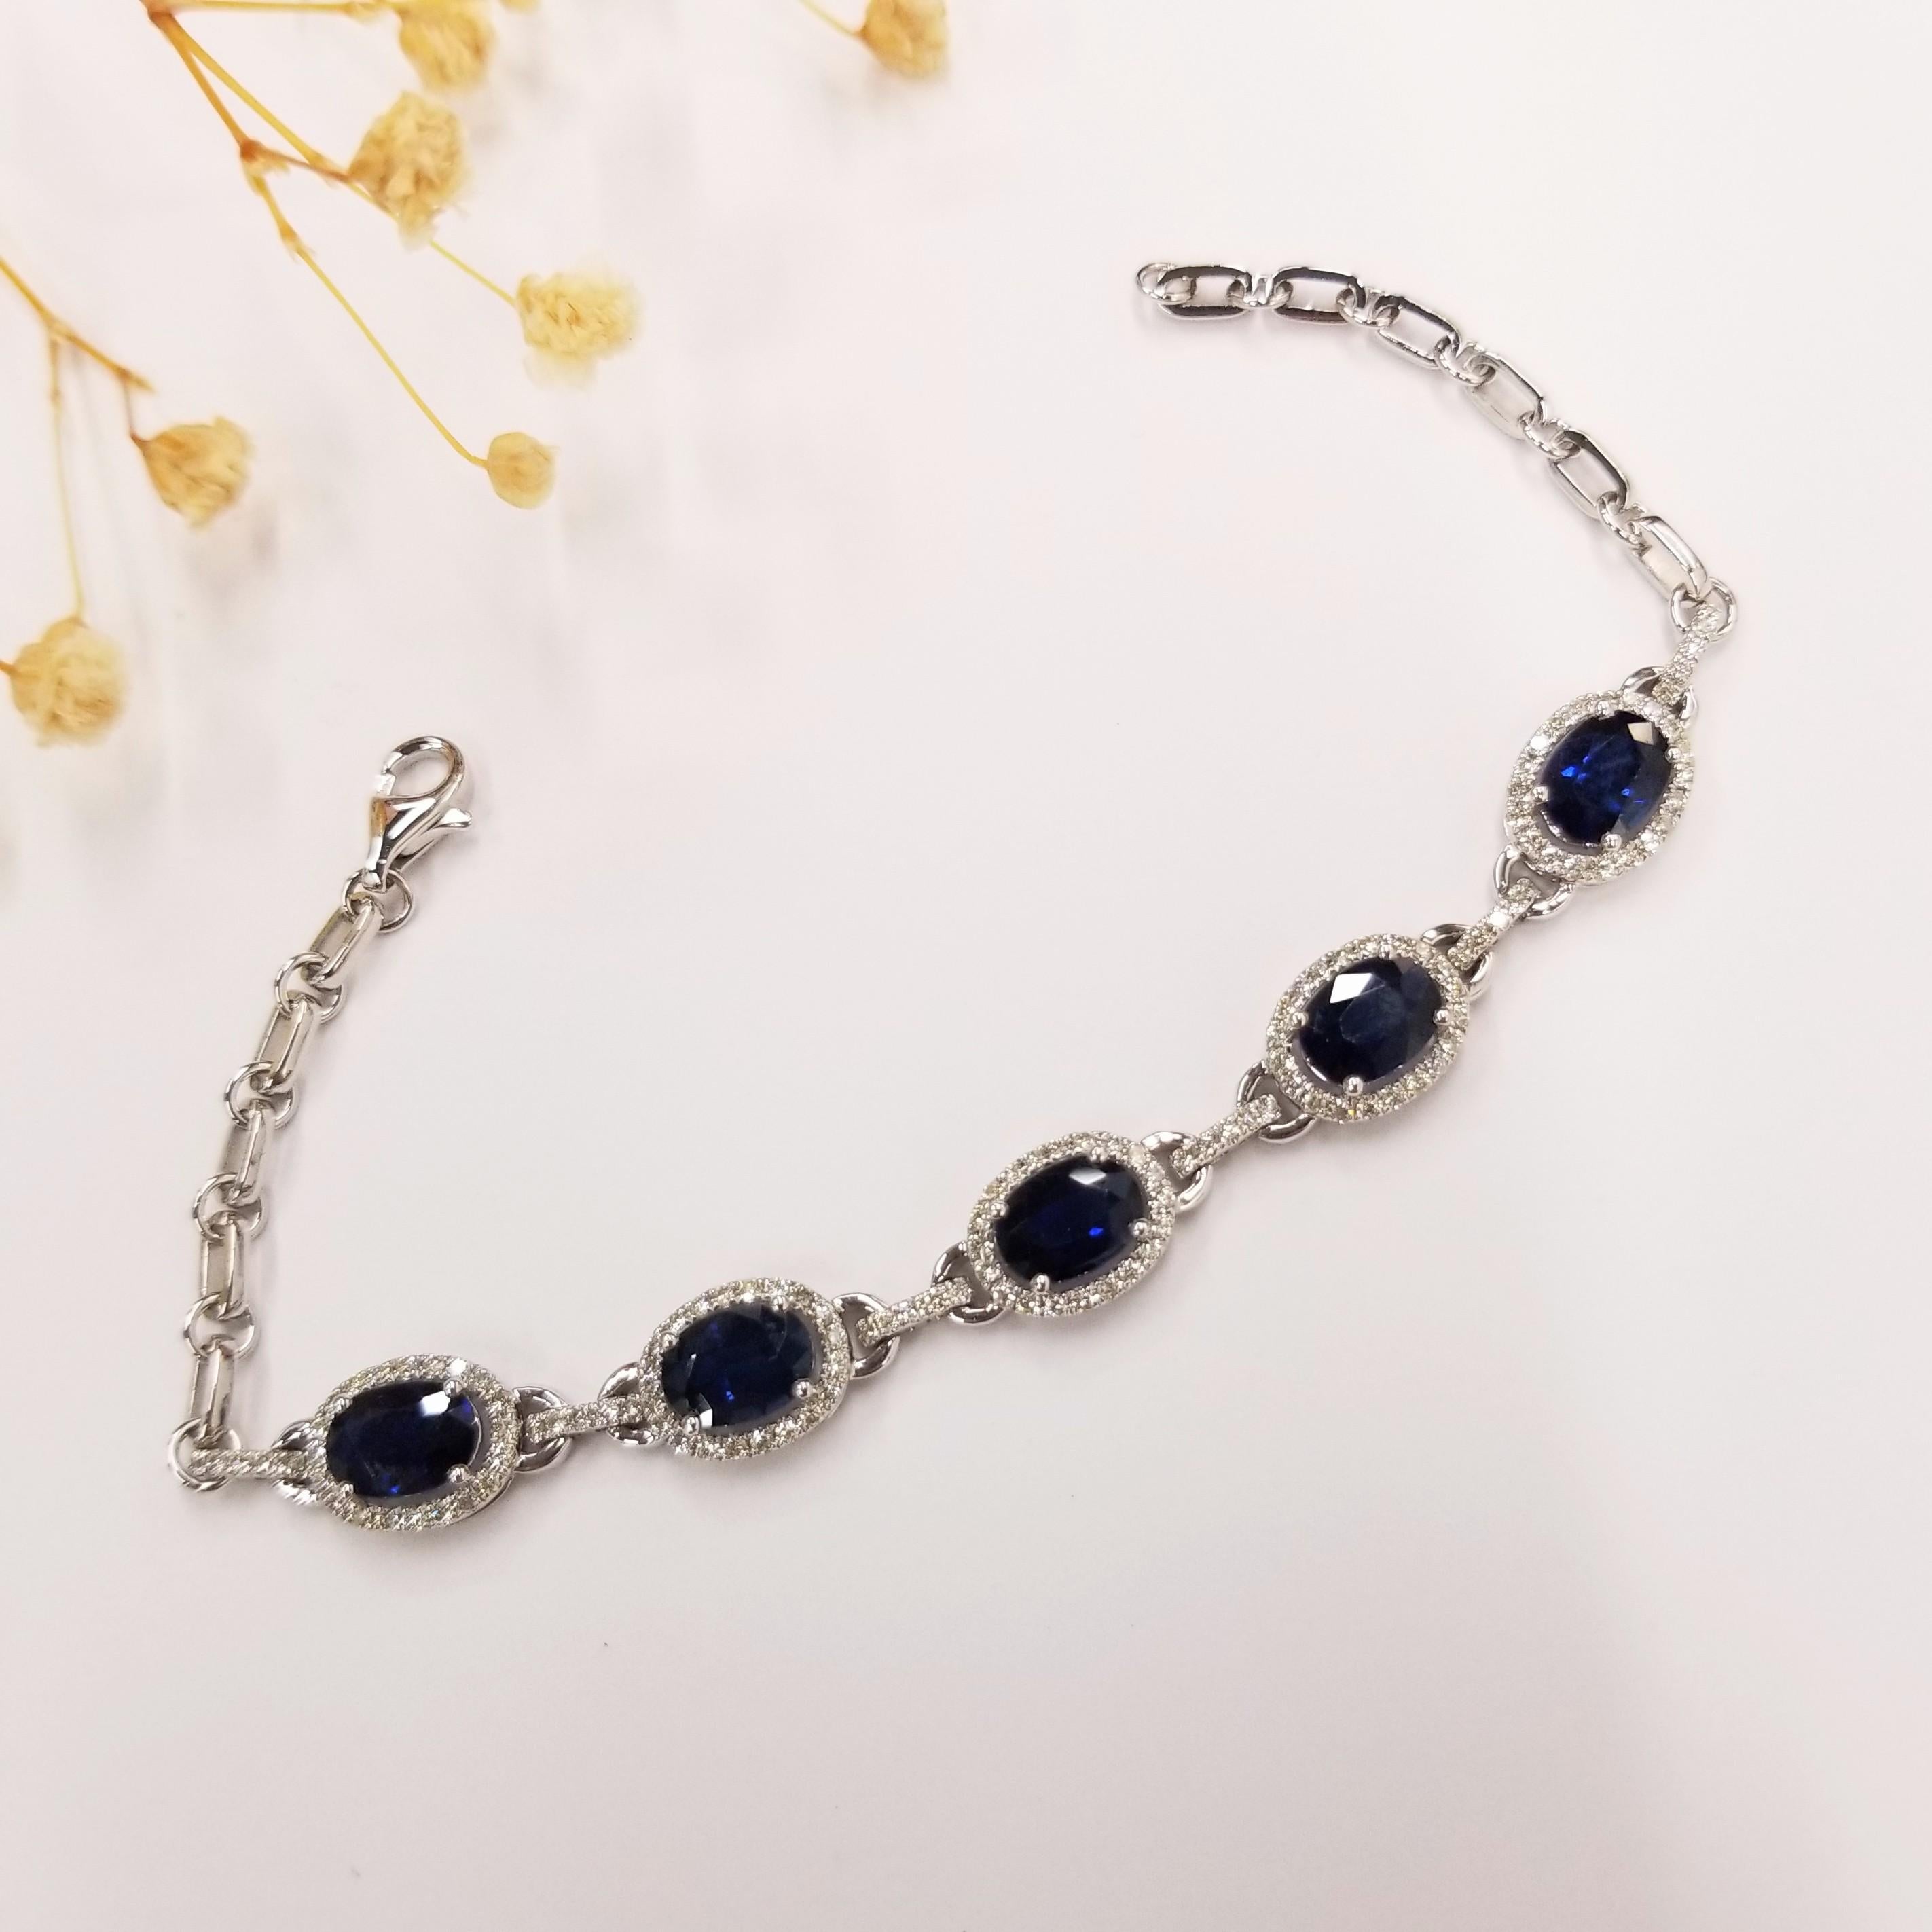 Introducing the exquisite IGI Certified 5.32Ct Blue Sapphire & Diamond Bracelet in 18K Gold, a true testament to sophistication and elegance. This stunning bracelet showcases oval-shaped pink sapphires in an intense blue hue, each weighing more than